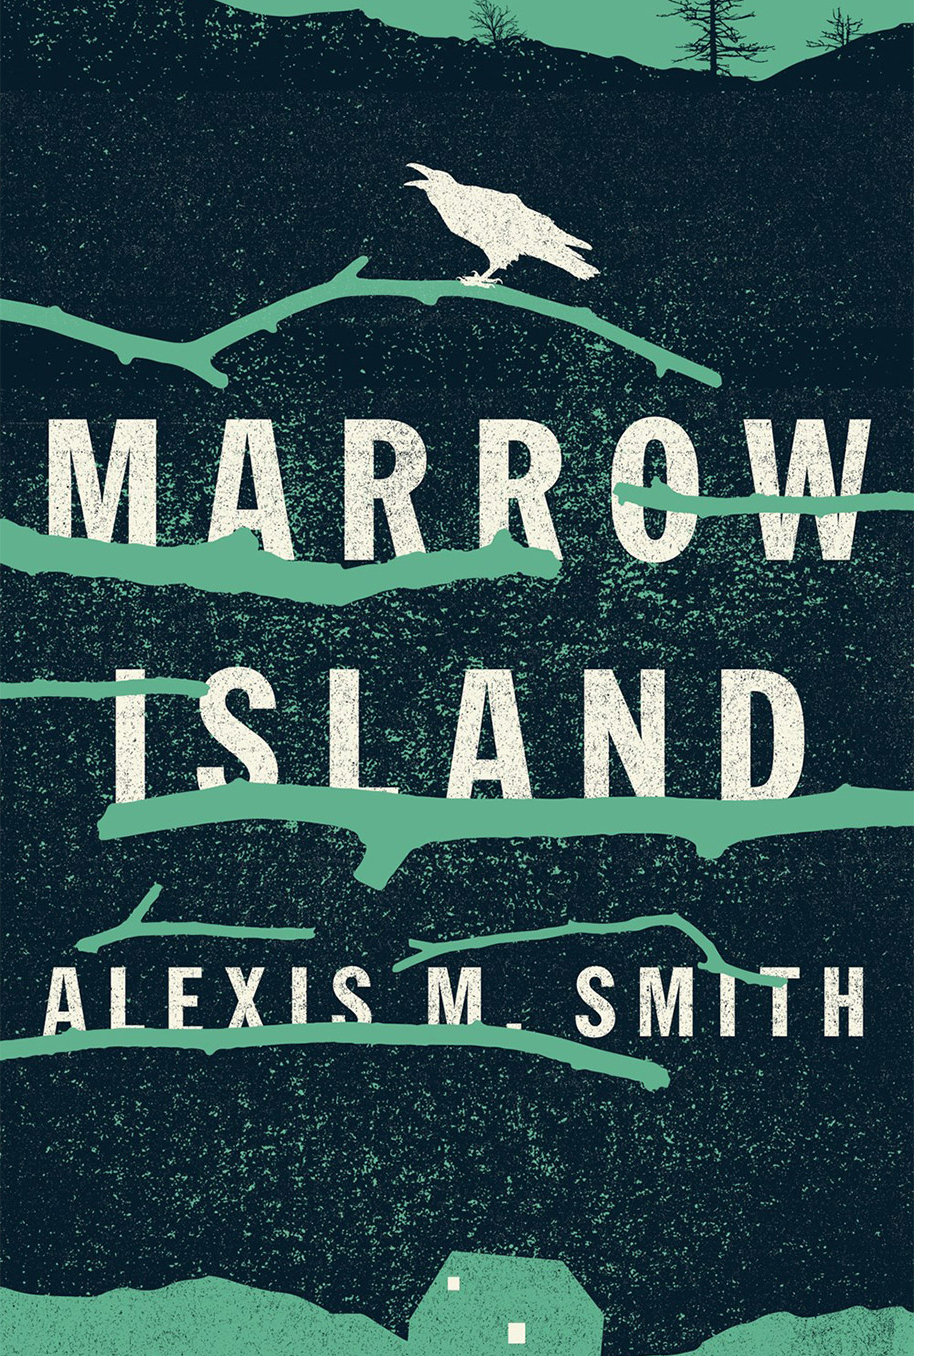 cover of Marrow Island by Alexis M. Smith